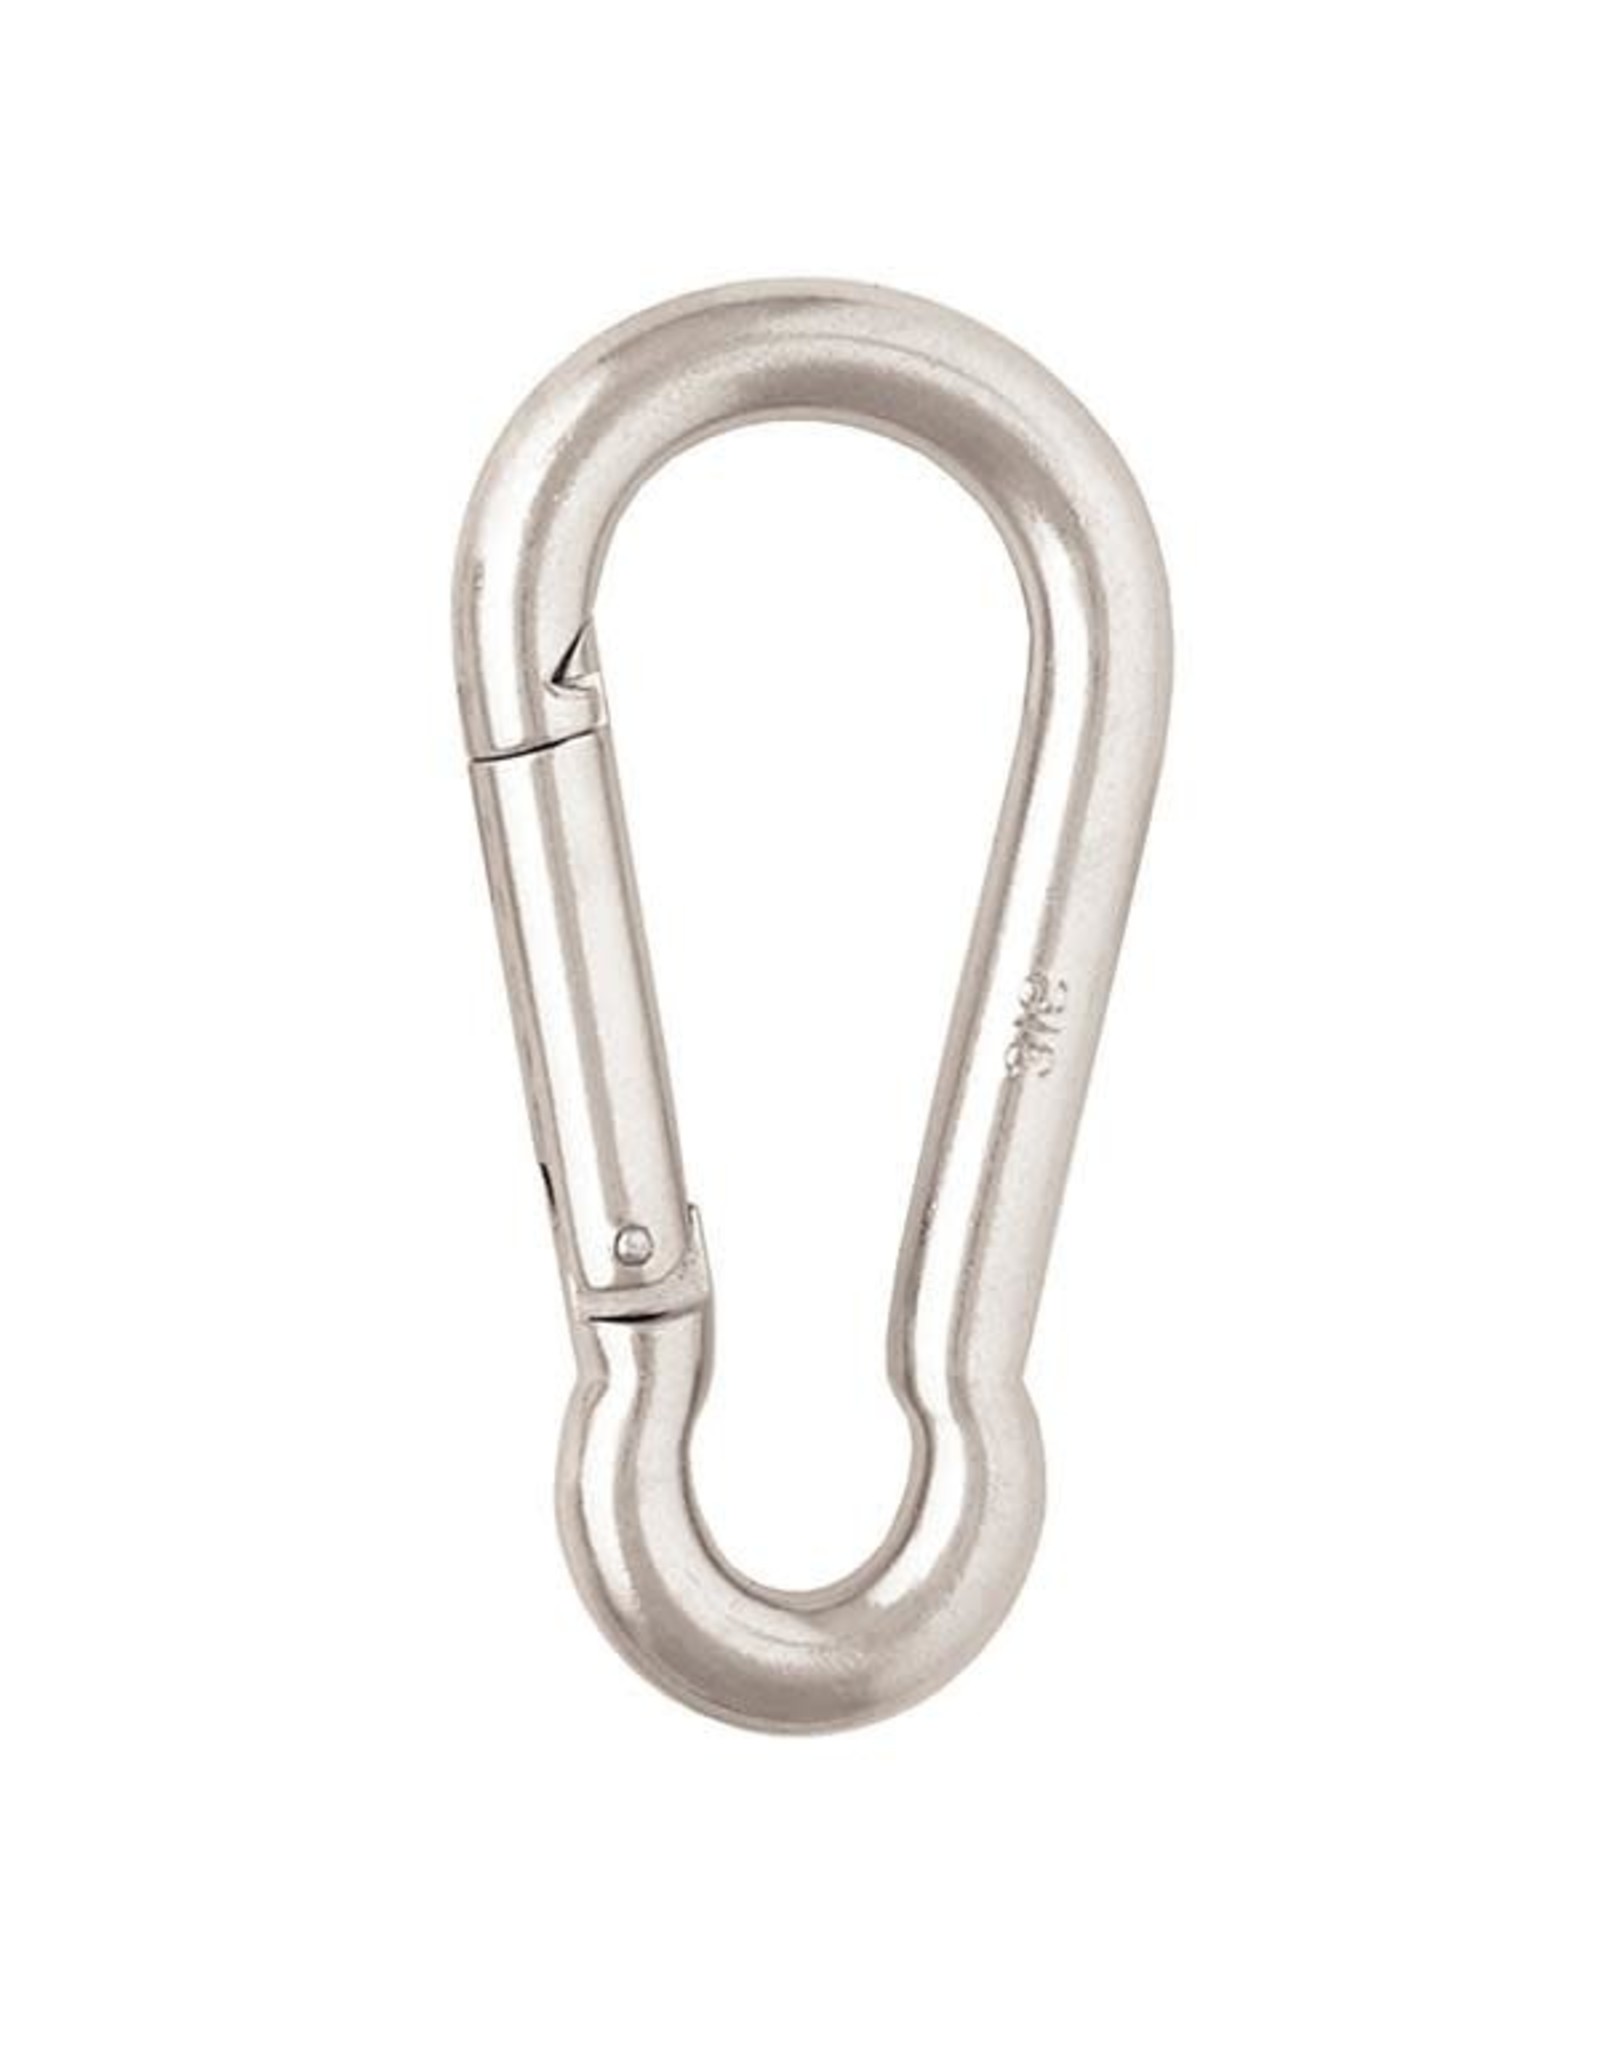 Safety Spring Snap / Carabiner Zinc Plated 5/16"